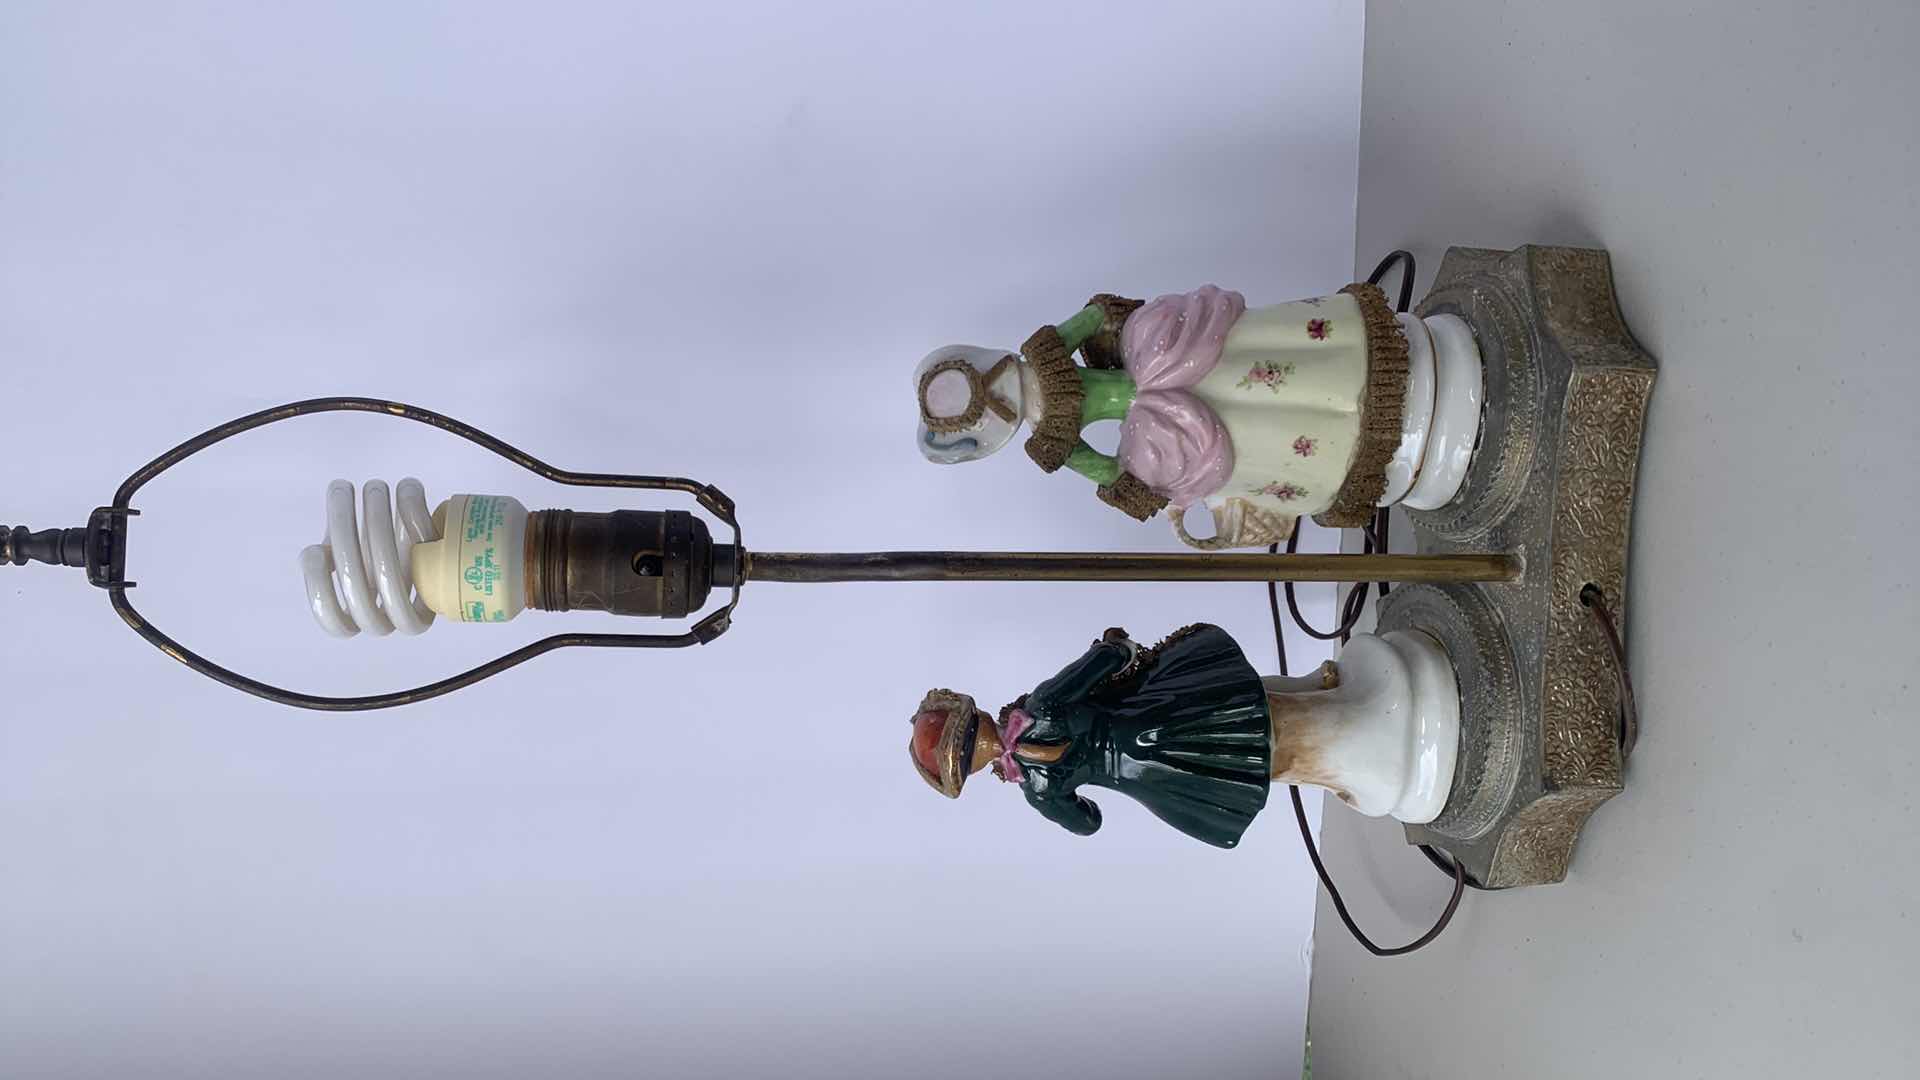 Photo 6 of ANTIQUE HANDPAINTED PORCELAIN FIGURINE ON ETCHED METAL BASE LAMP FIXTURE, H 22”